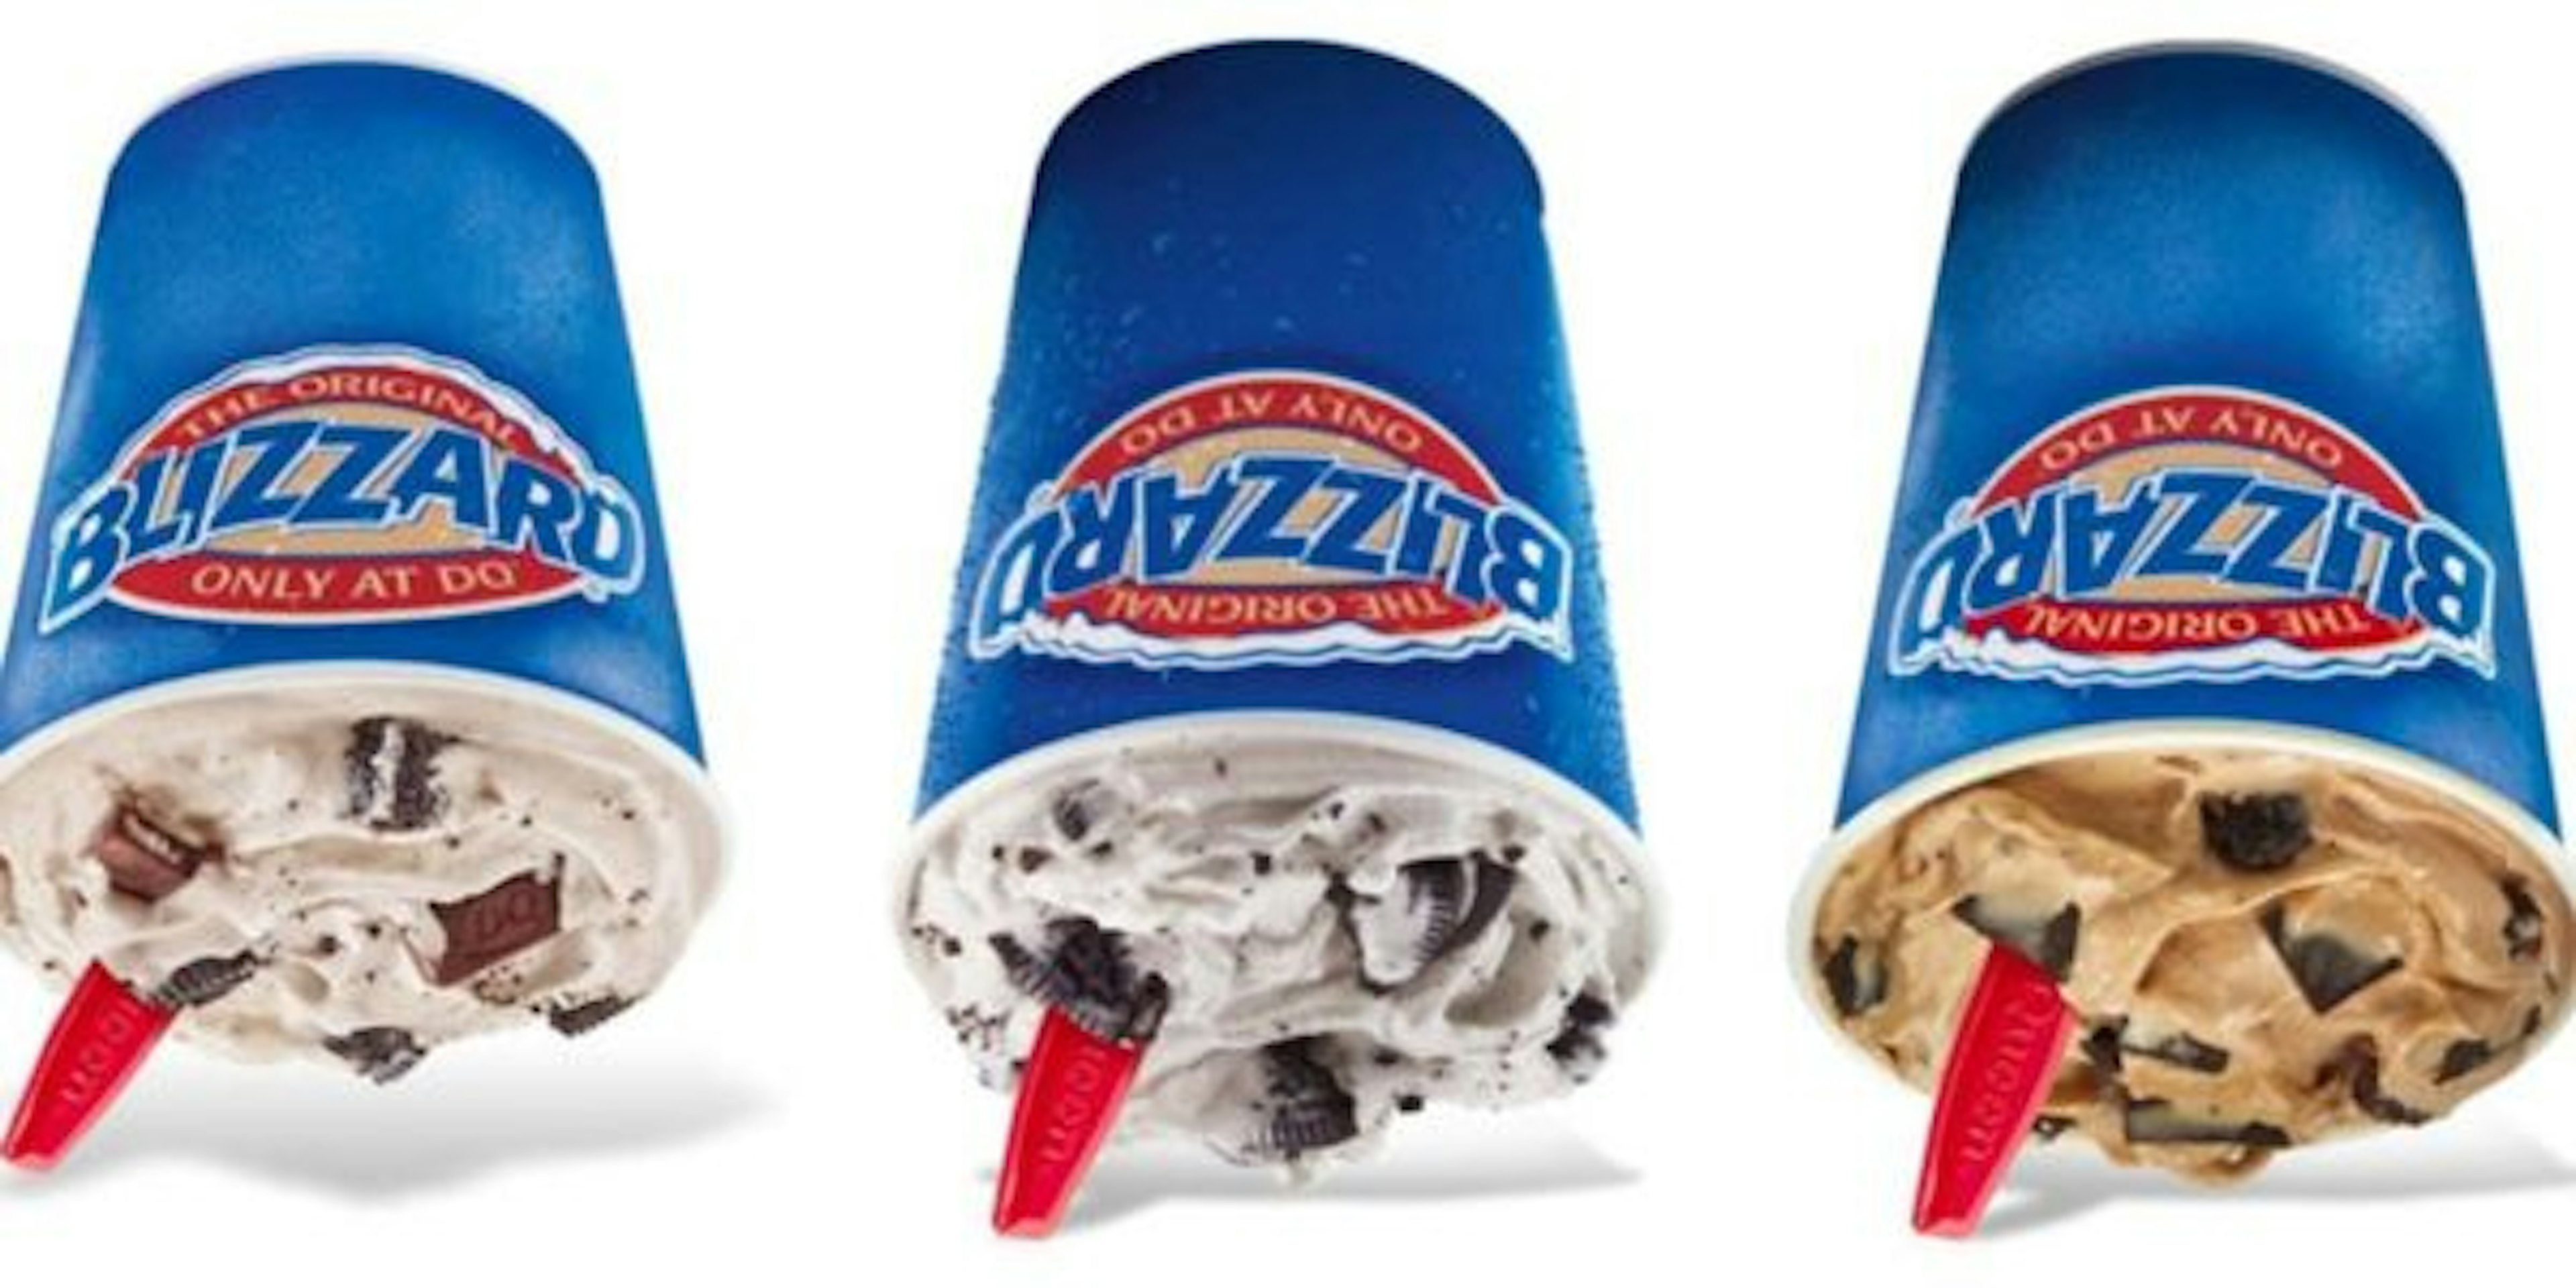 $1 Off When You Buy 2 Blizzards